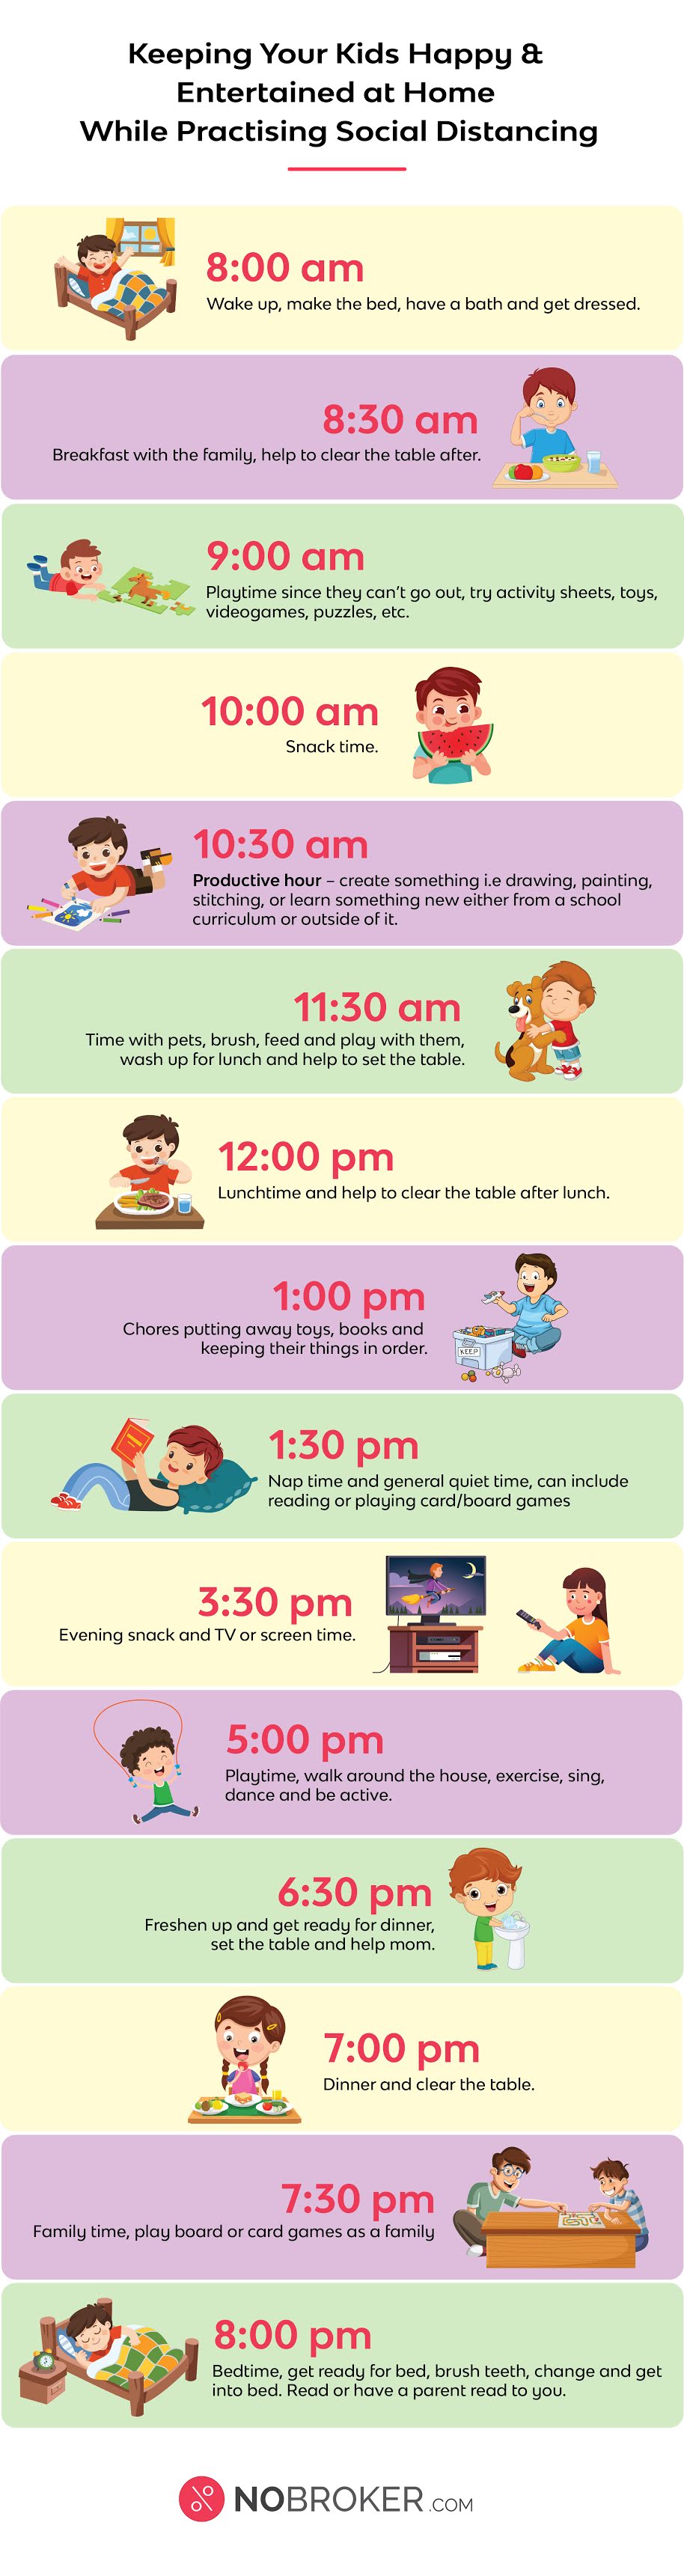 Keep Your Kids Happy & Entertained at Home With Social Distancing